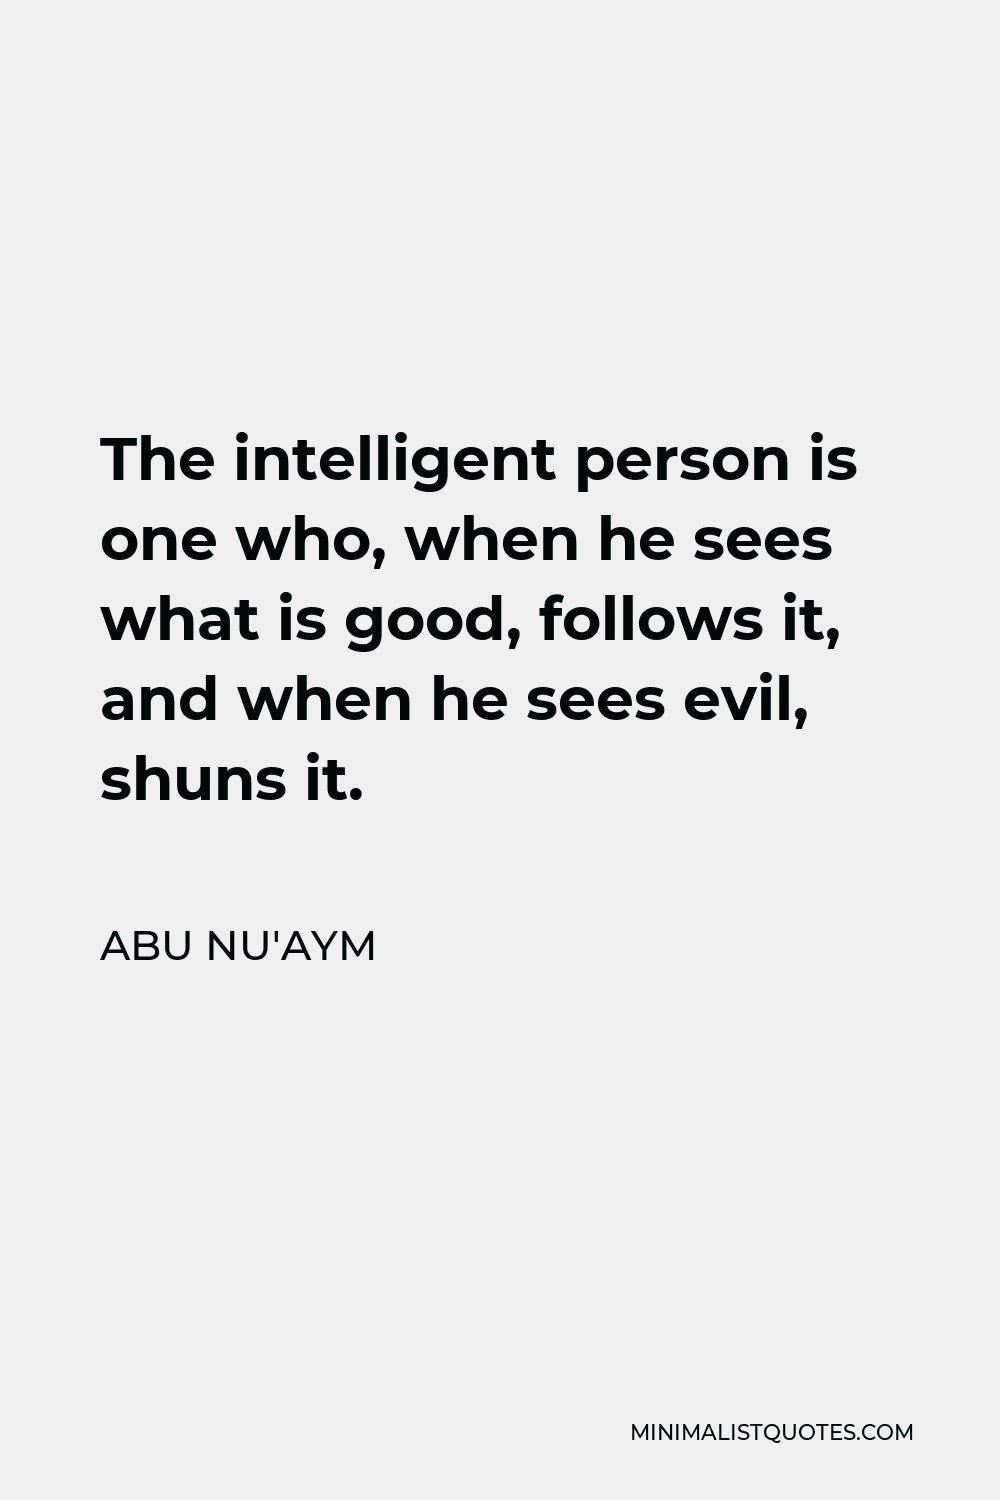 Abu Nu'aym Quote - The intelligent person is one who, when he sees what is good, follows it, and when he sees evil, shuns it.